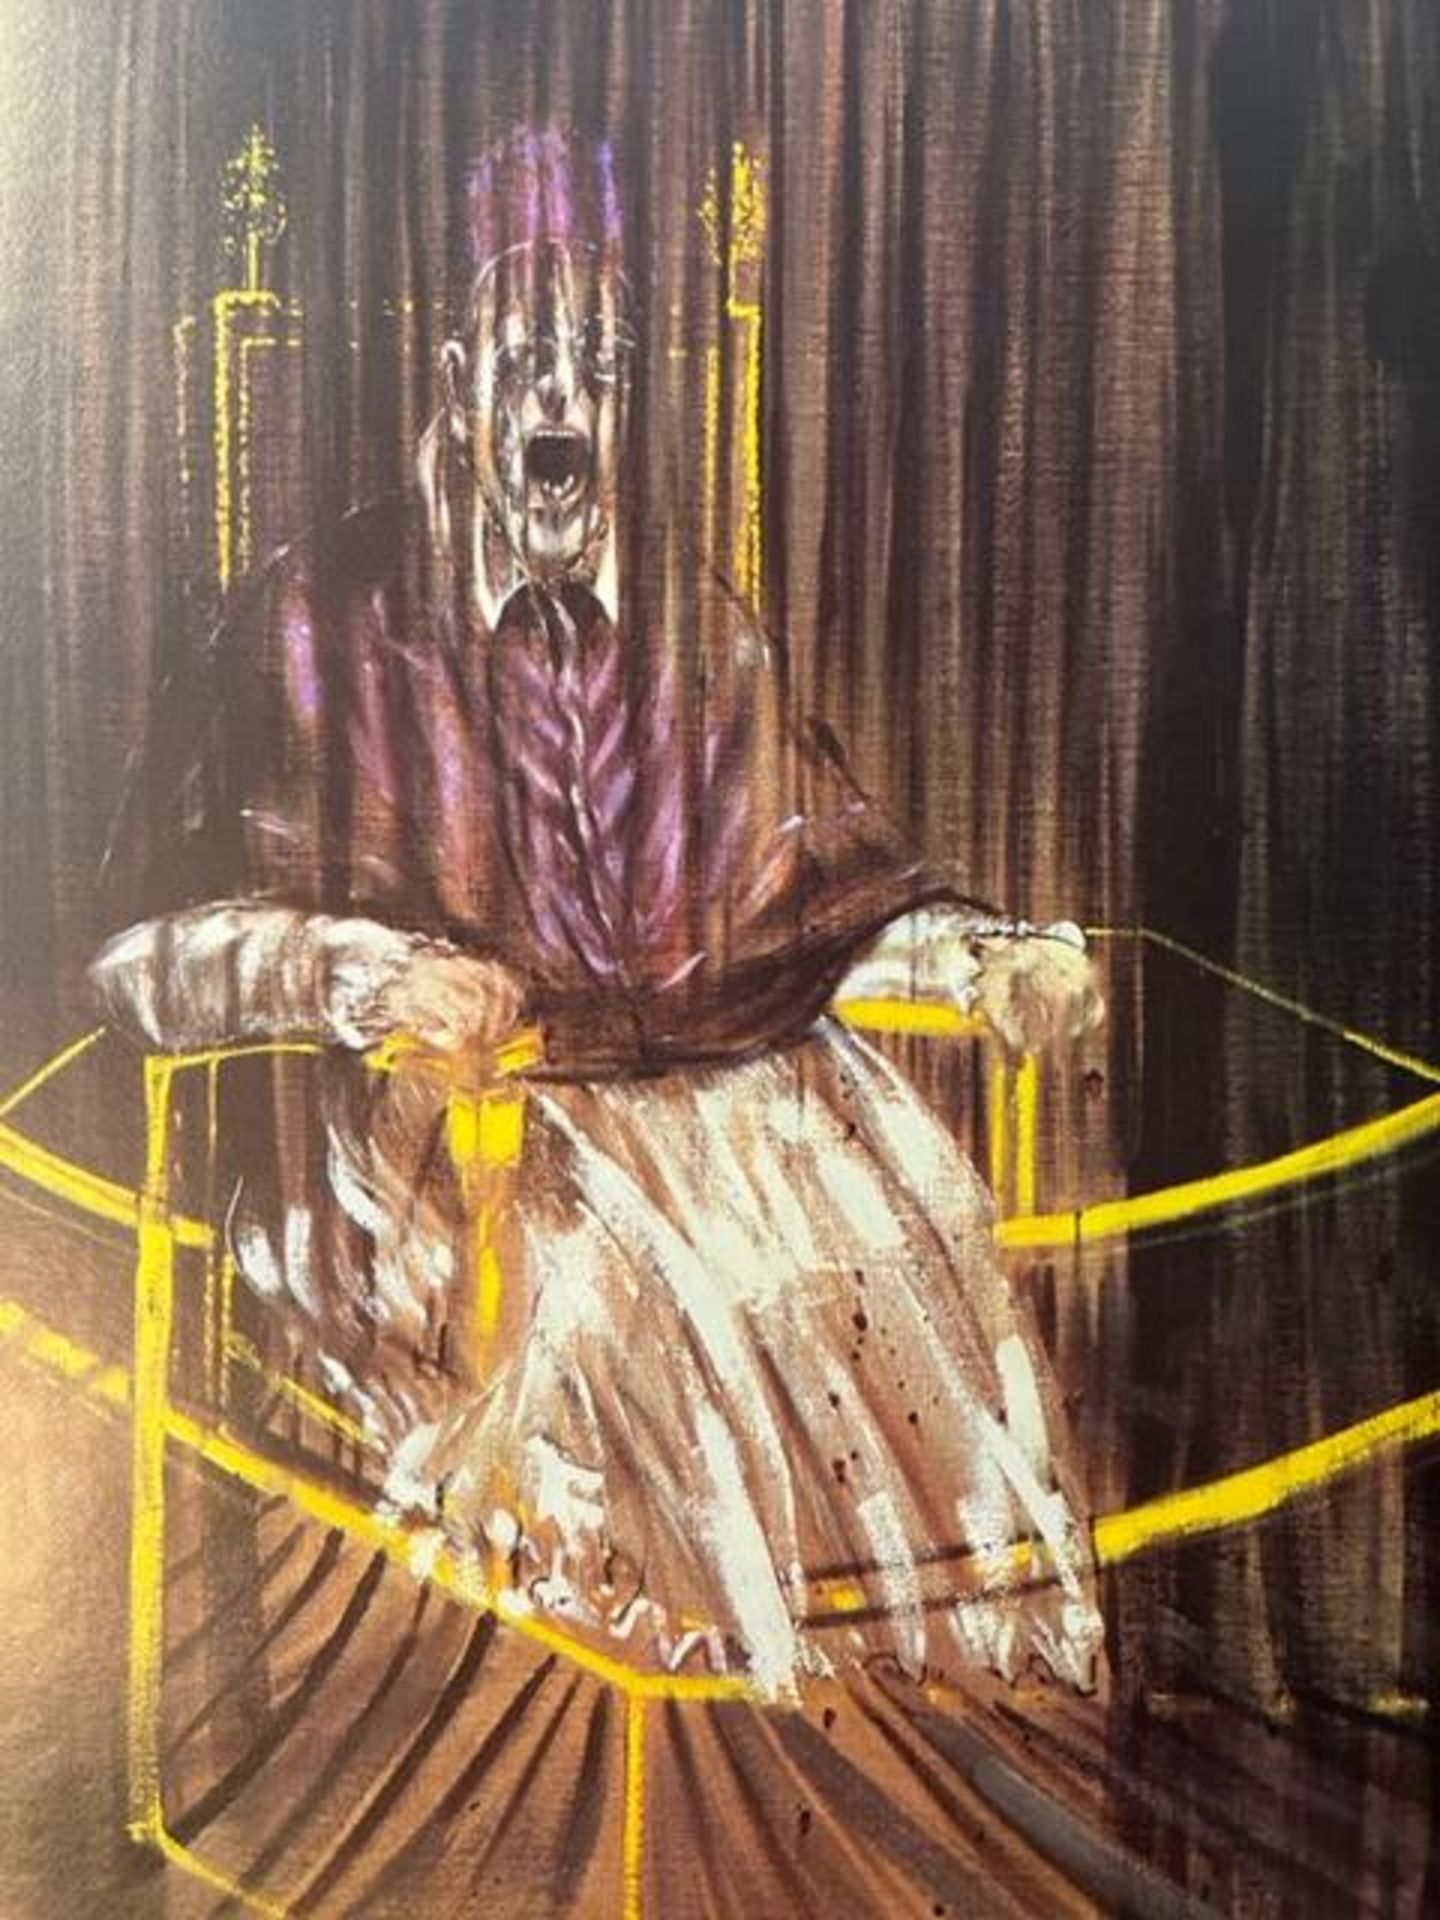 Francis Bacon "Study after Velazques's Portrait of Pope Innocent X" Print.